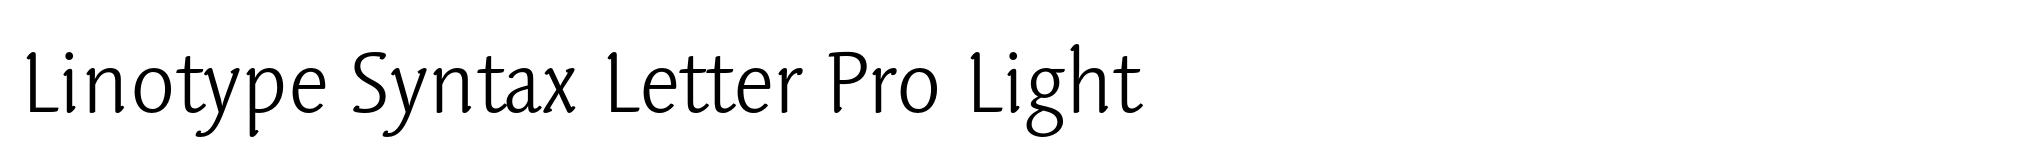 Linotype Syntax Letter Pro Light image